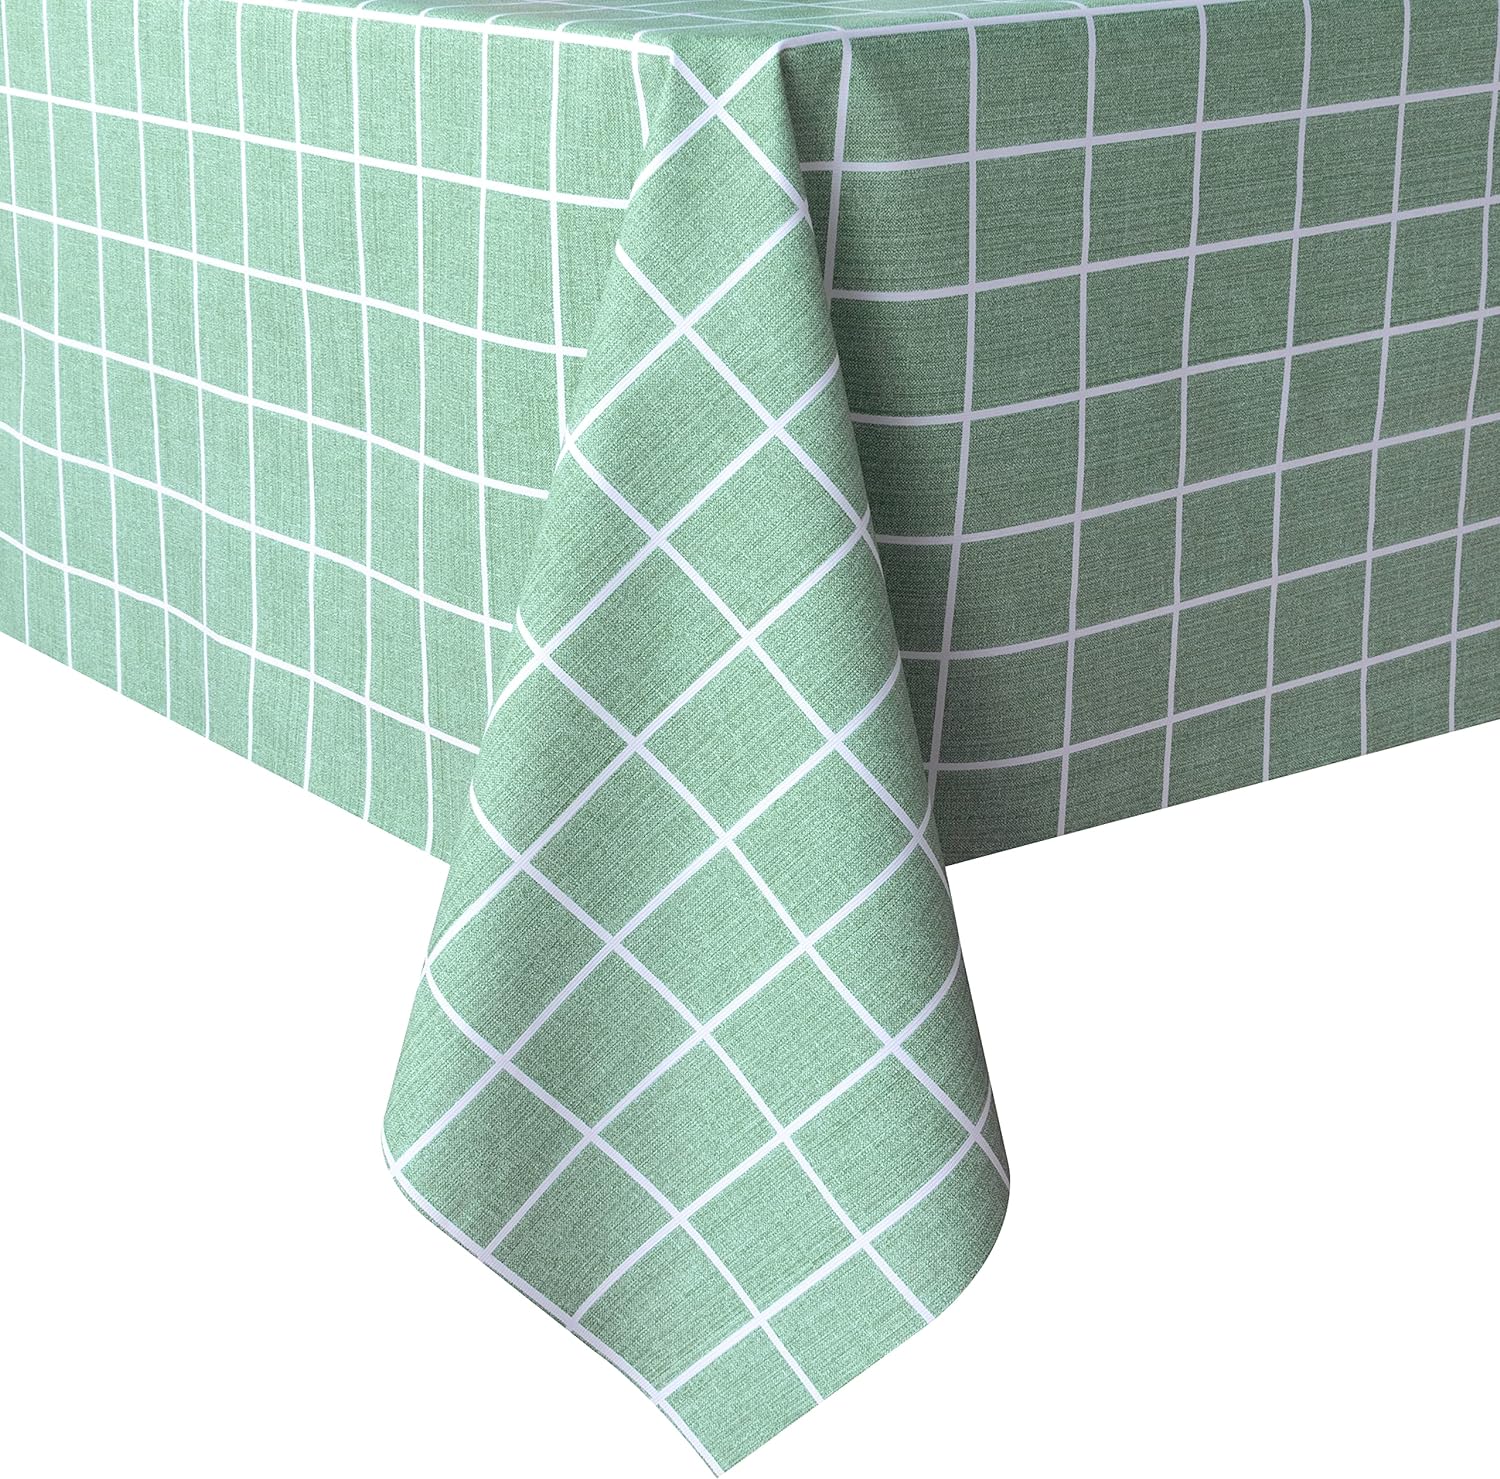 sancua Checkered Vinyl Rectangle Tablecloth - 54 x 78 Inch - 100% Waterproof Oil Proof Spill Proof PVC Table Cloth, Wipe Clean Table Cover for Dining Table, Buffet Parties and Camping, Green Checkered